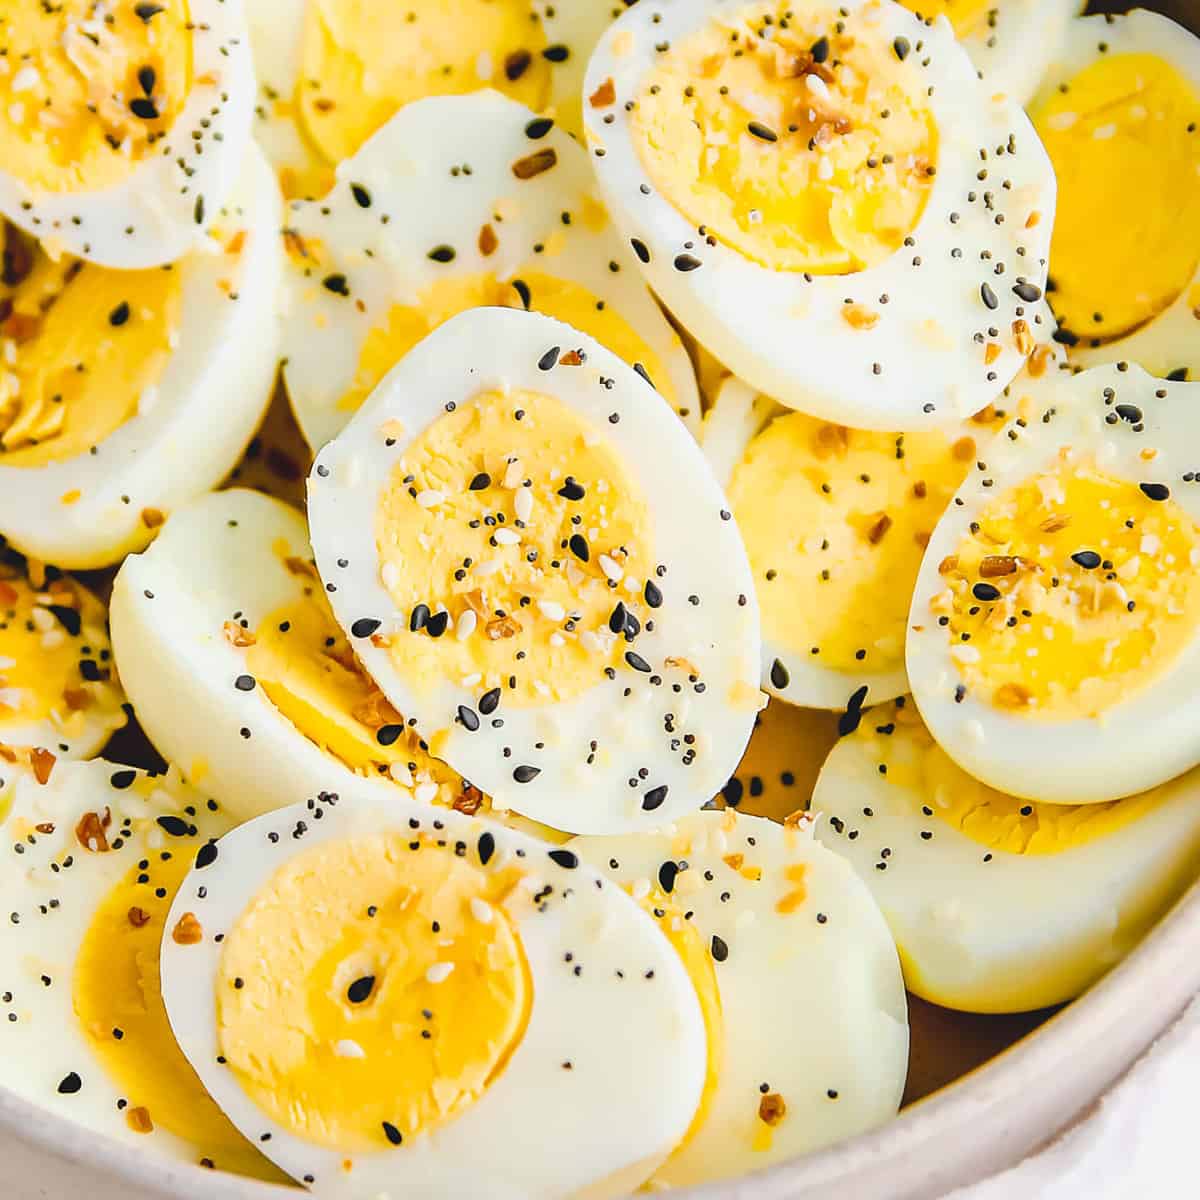 Air Fryer Hard Boiled Eggs - My Life After Dairy